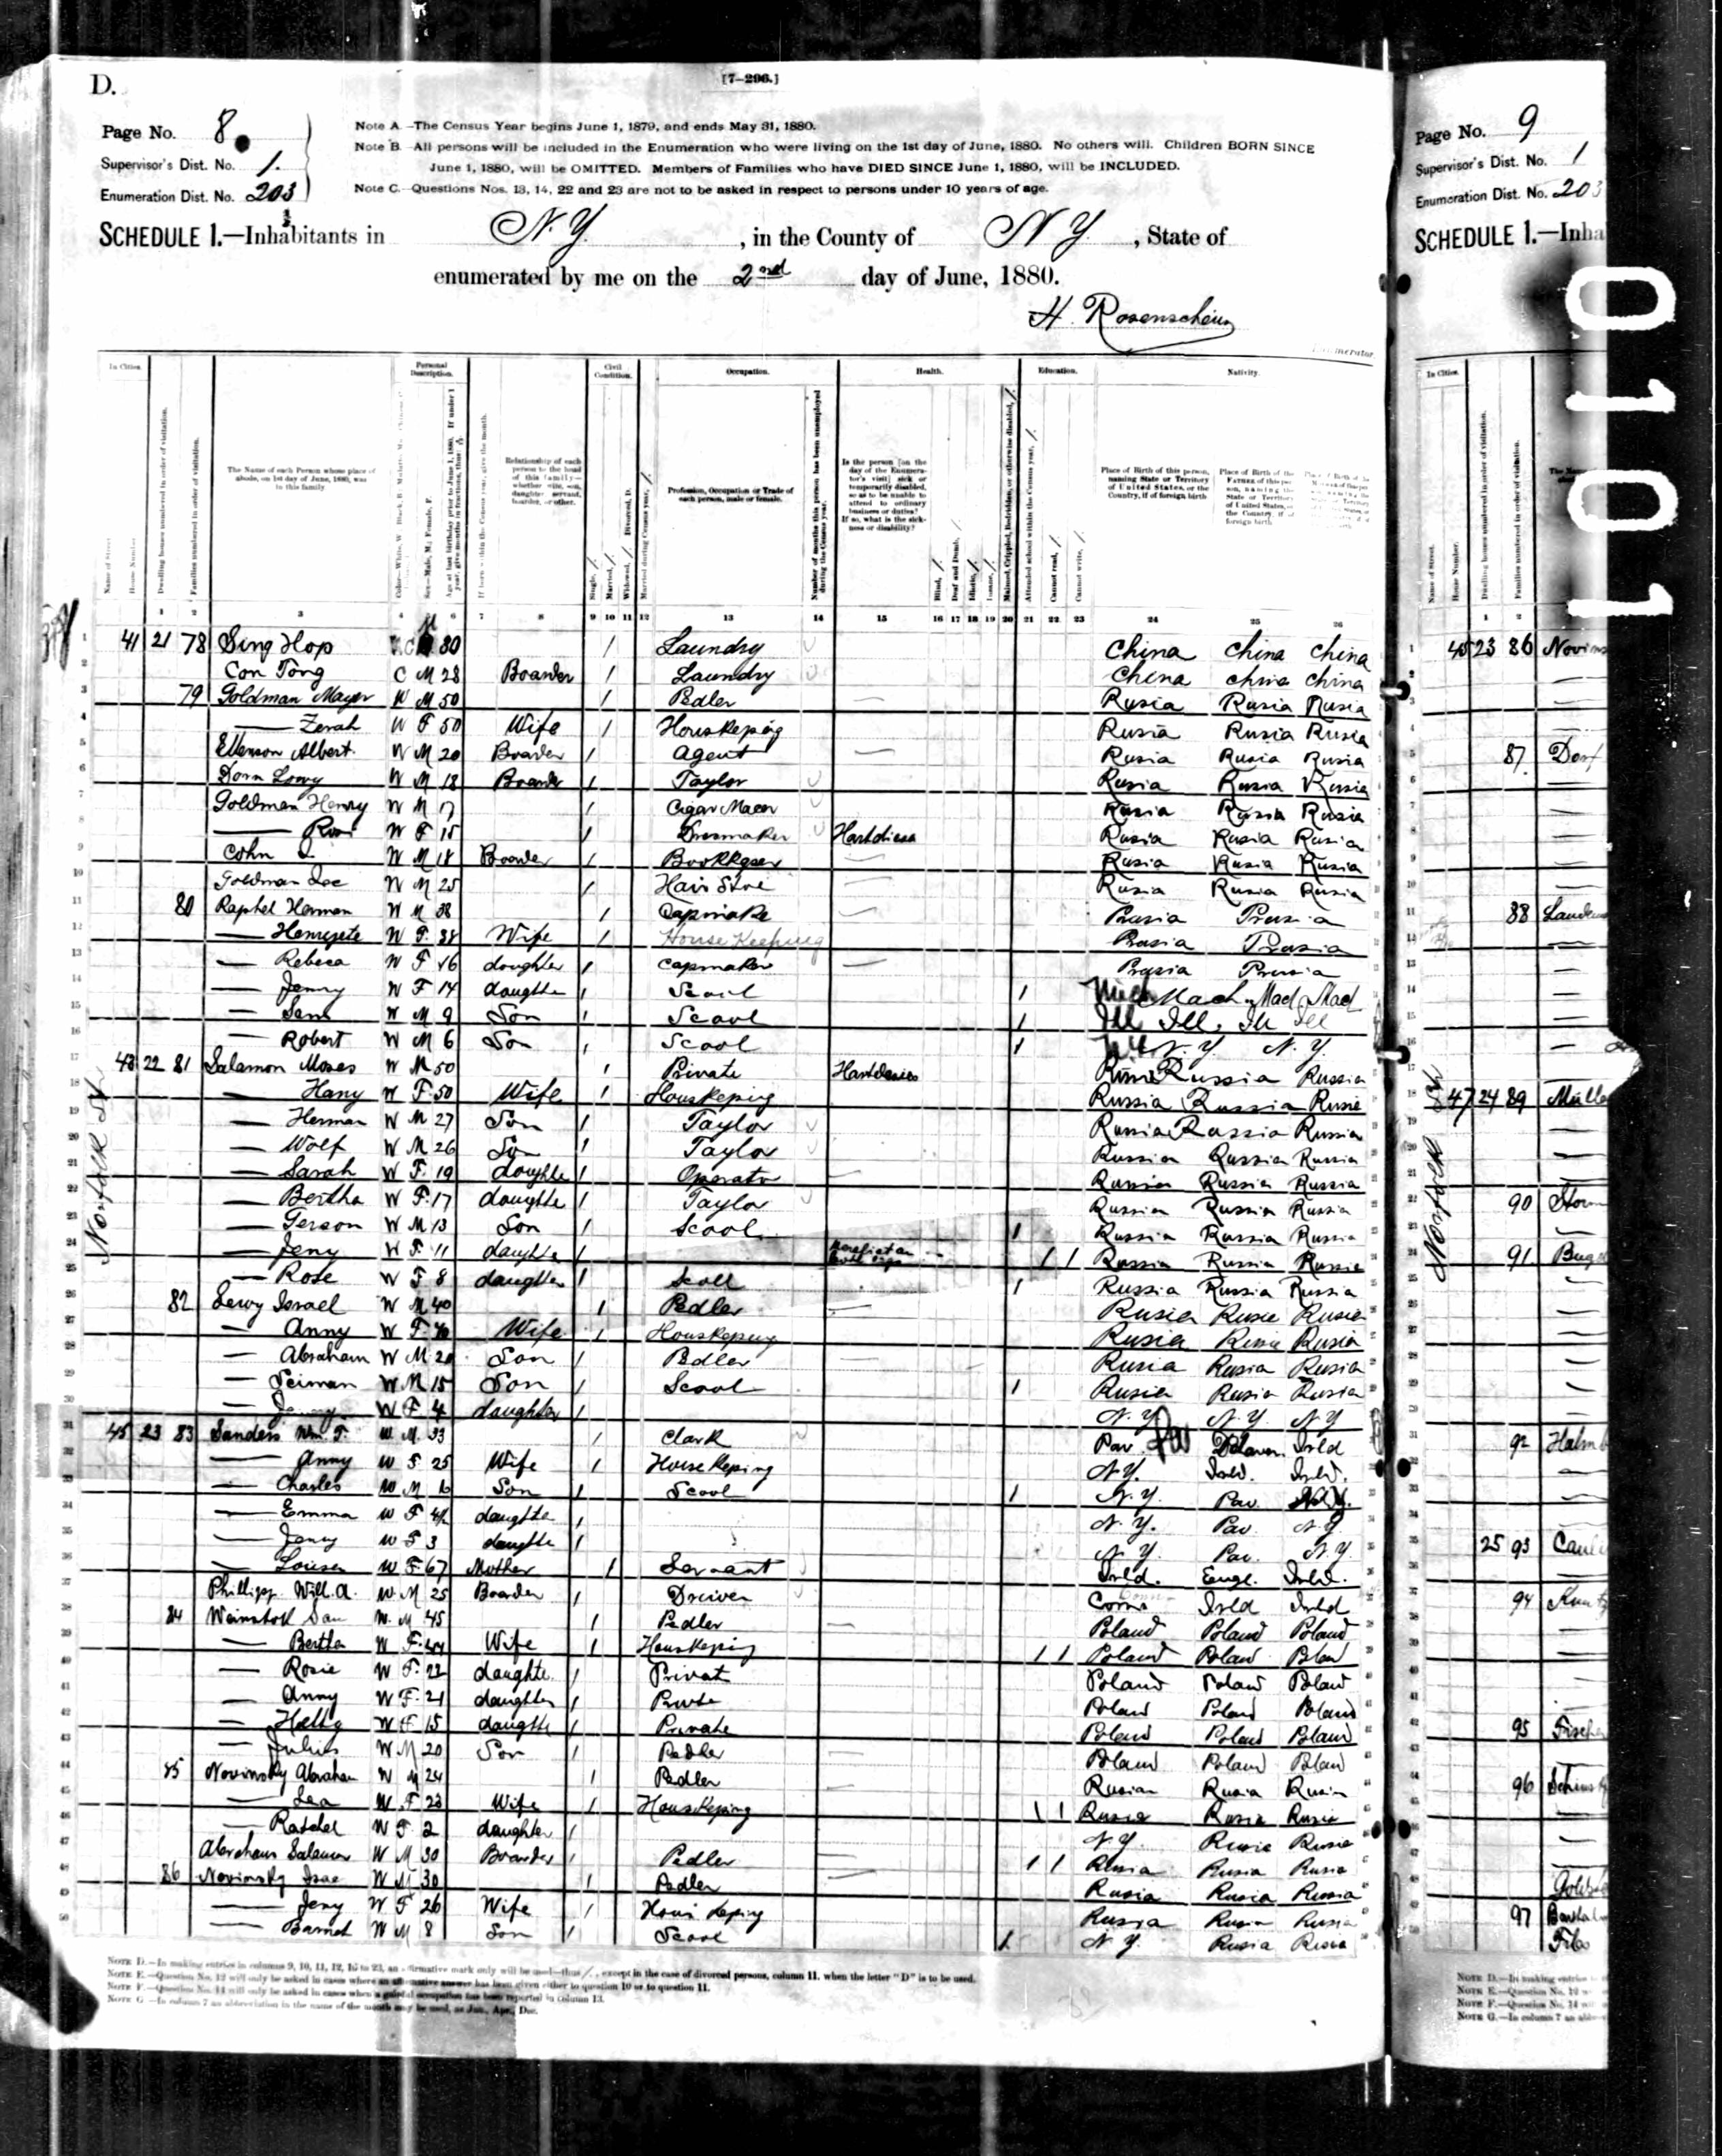 1880 US census Rose Goldman with family